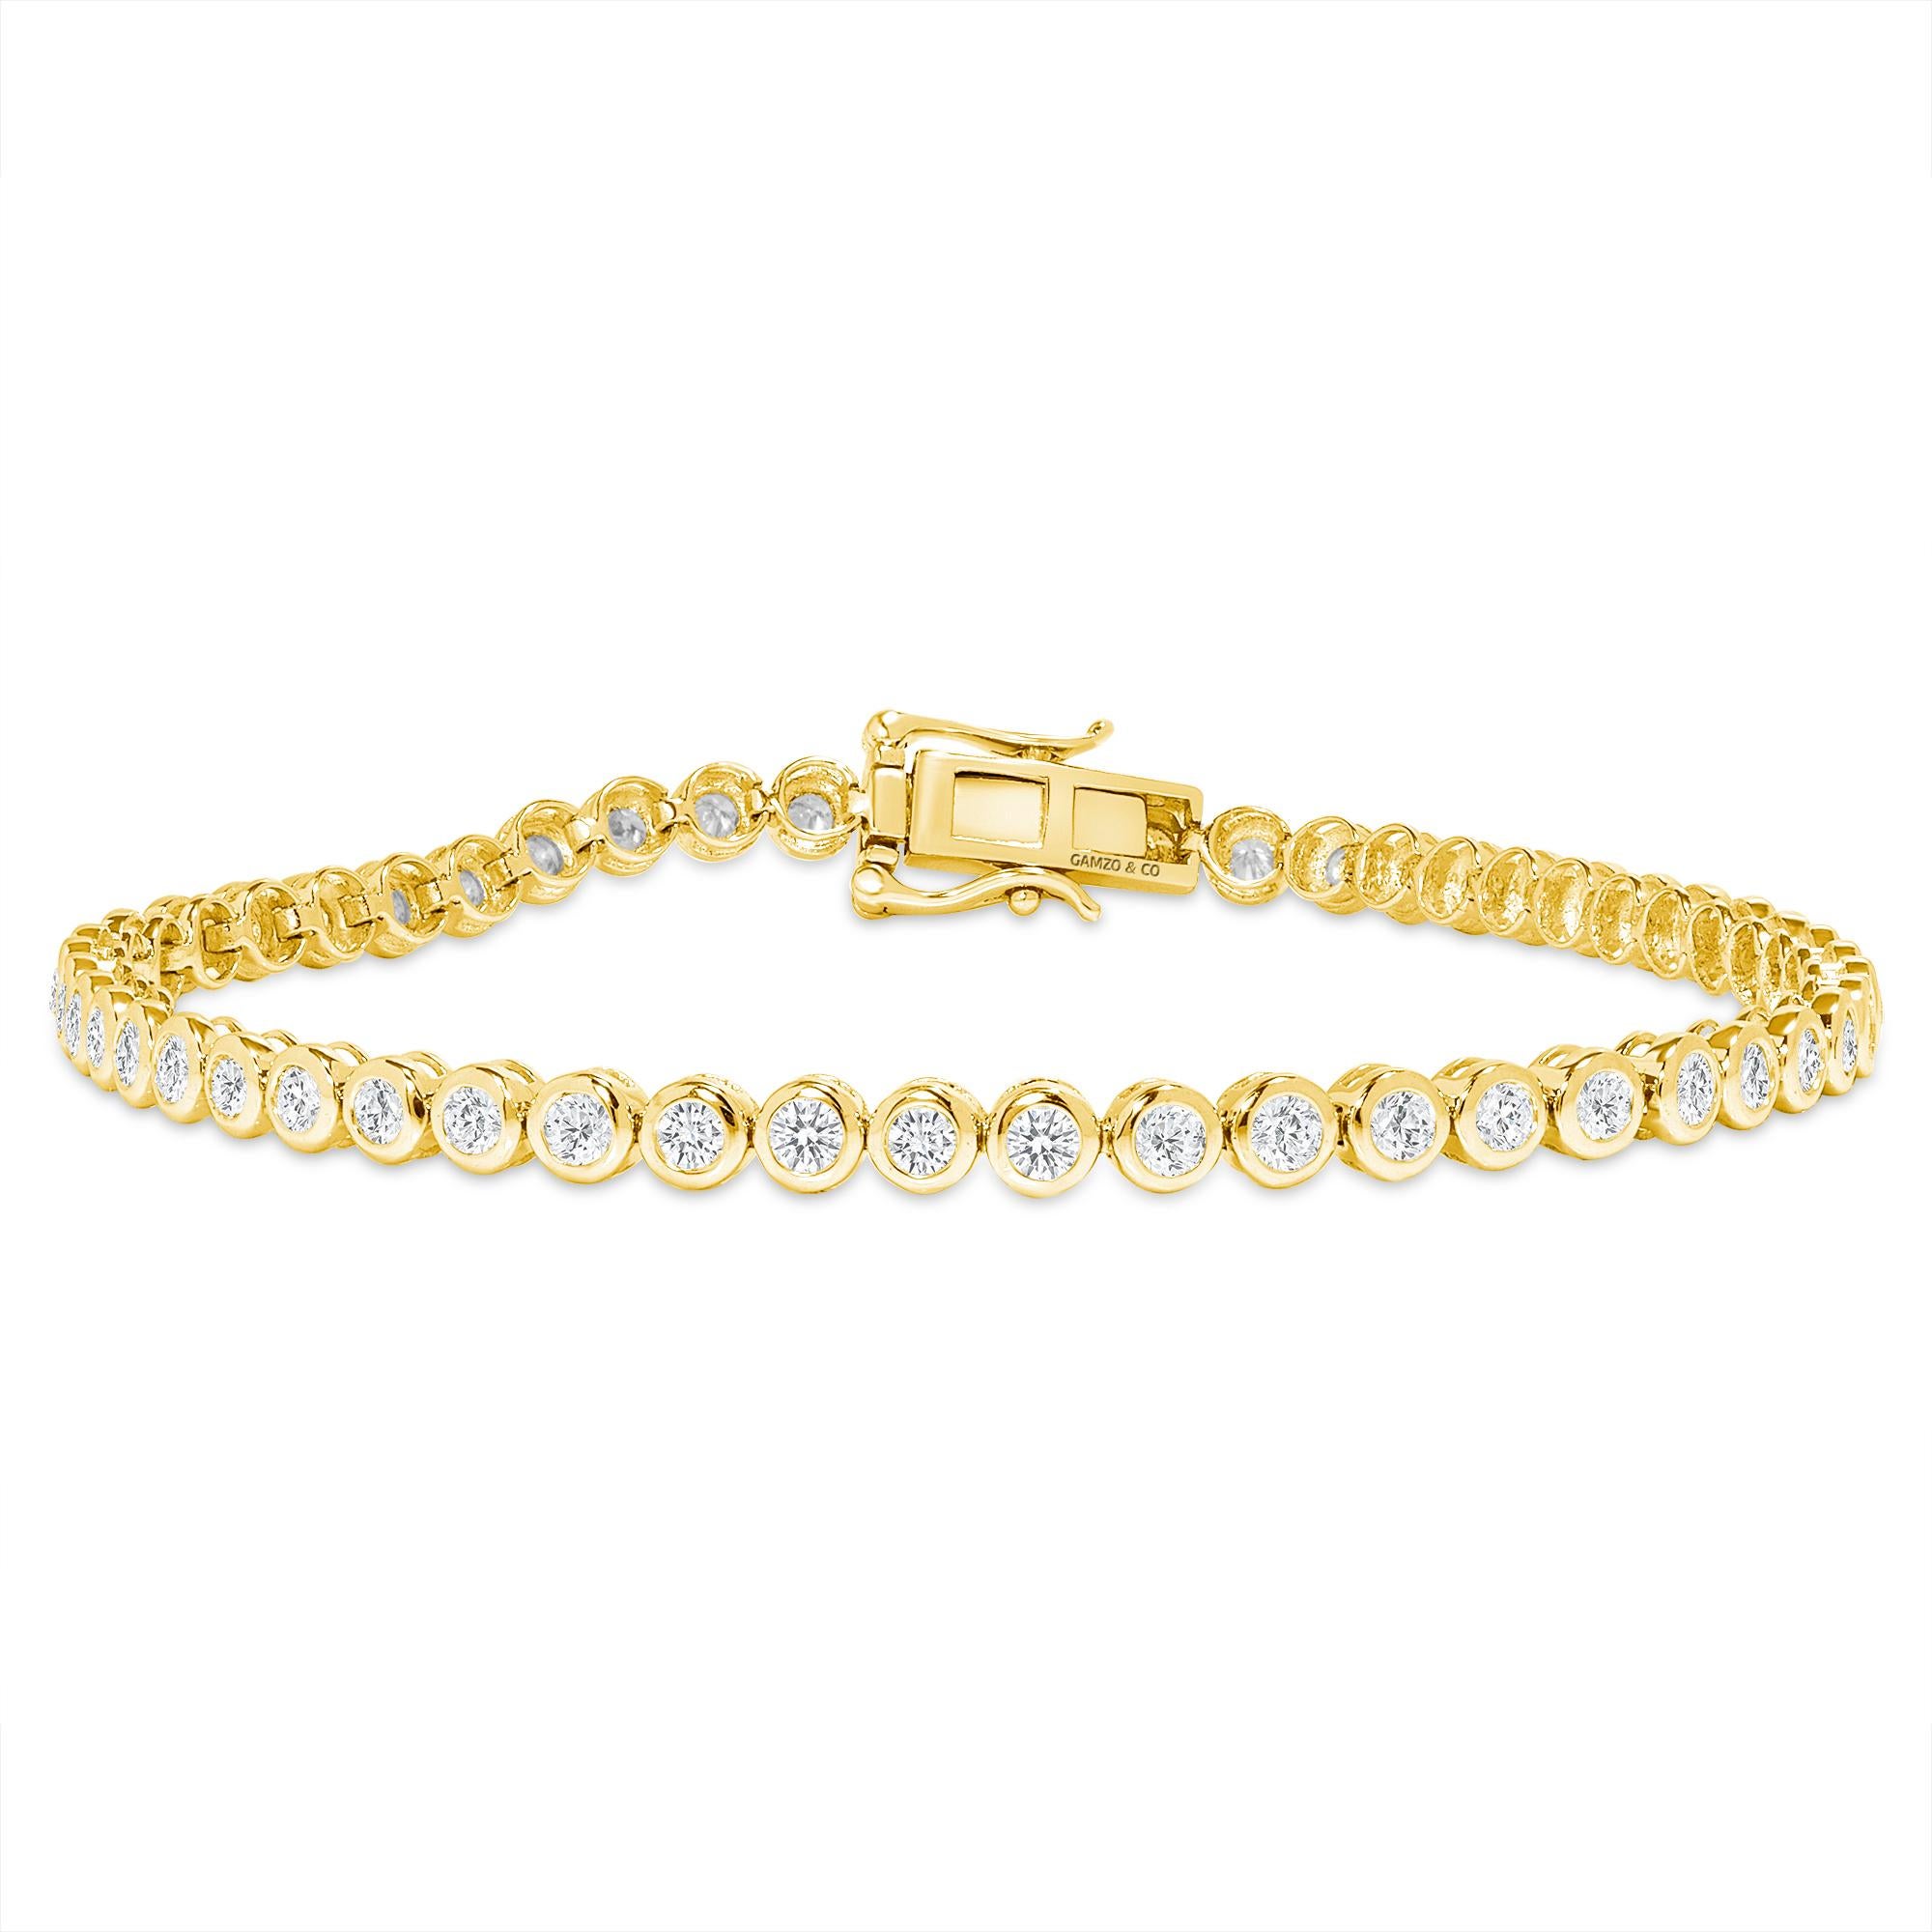 These beautiful round diamonds dance around your wrist as they absorb light and attention.
Metal: 14k Gold
Diamond Cut: Round
Diamond Total Carats: 3ct
Diamond Clarity: VS
Diamond Color: F
Color: Yellow Gold
Bracelet Length: 6 Inches 
Included with